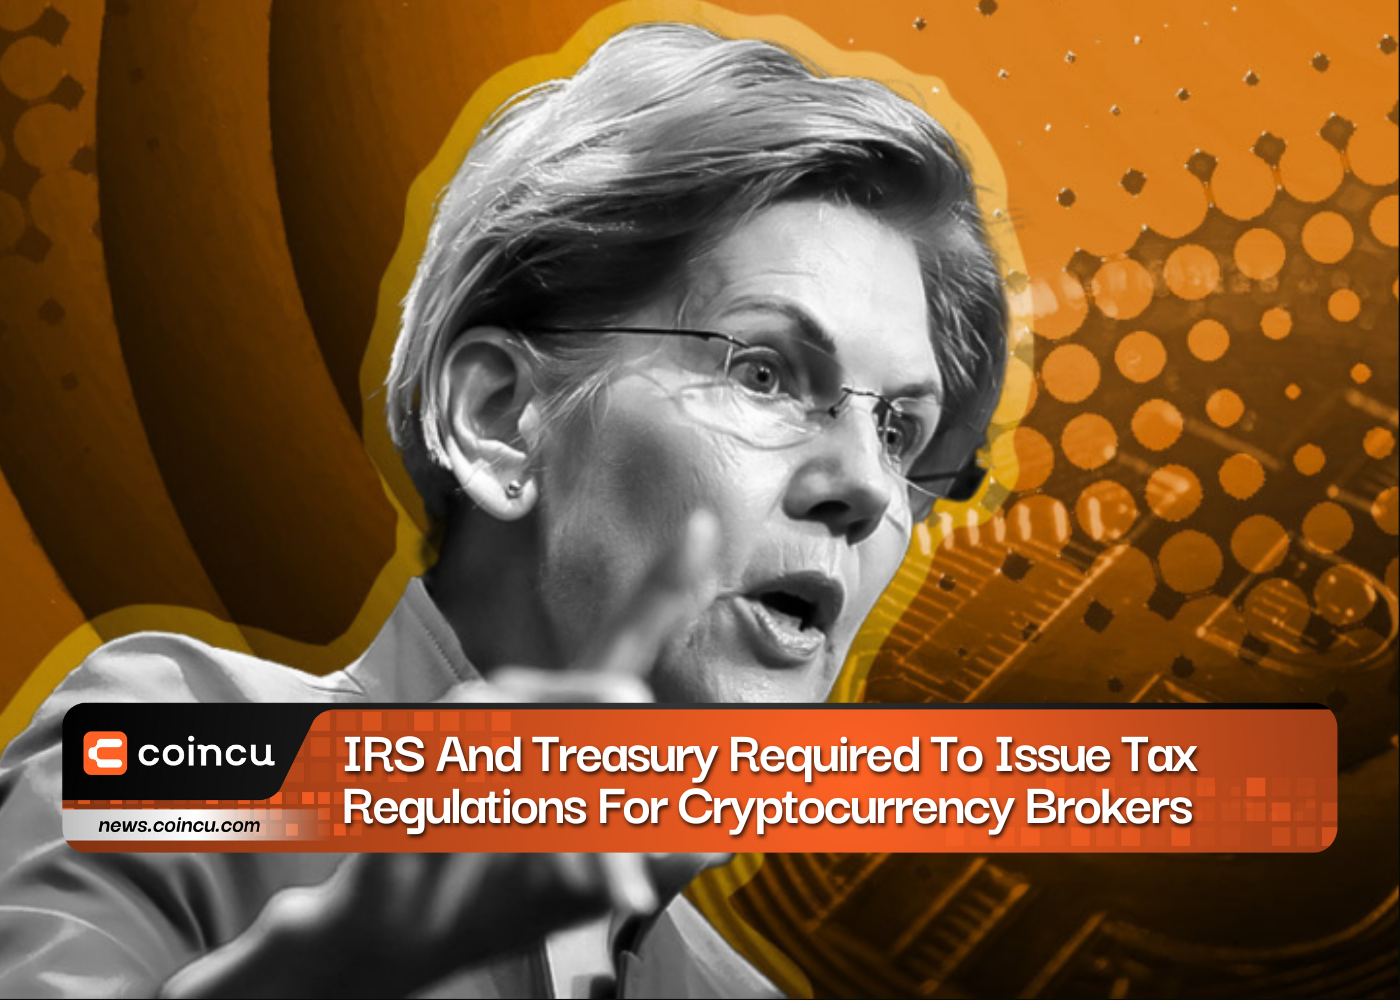 IRS And Treasury Required To Issue Tax Regulations For Cryptocurrency Brokers